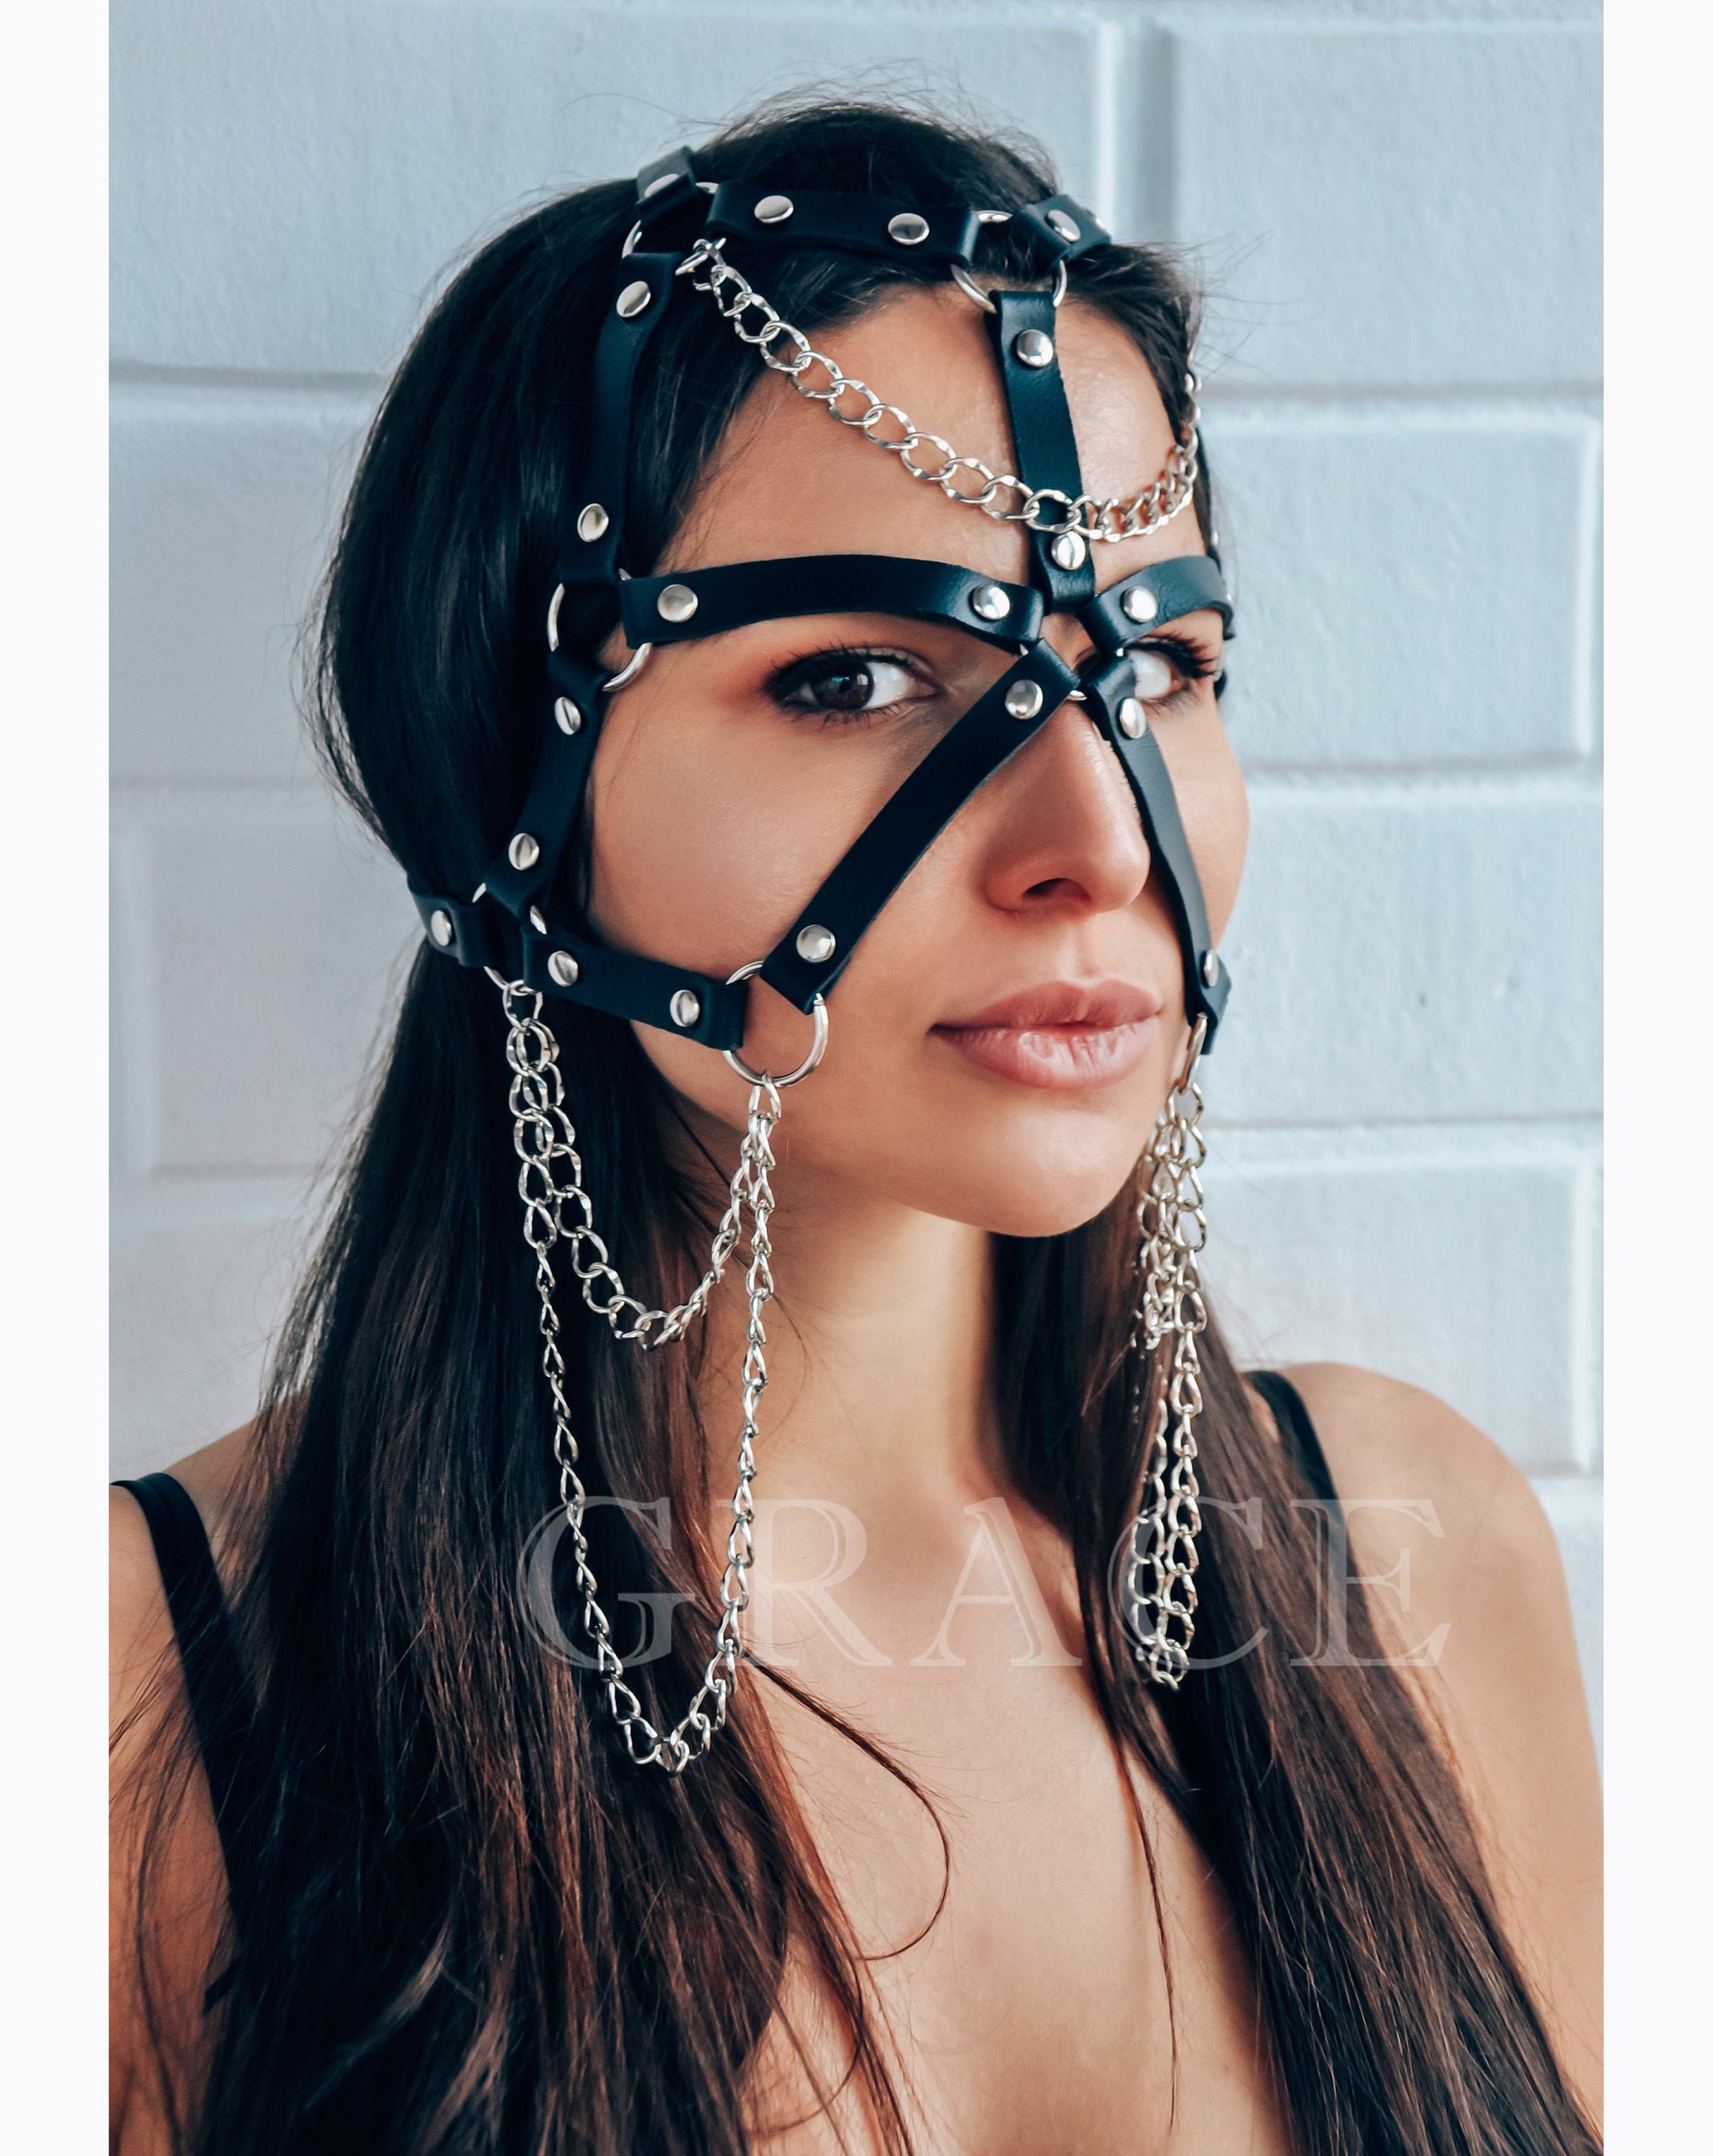 Leather Bdsm Mask for Leather Fetish Party Etsy